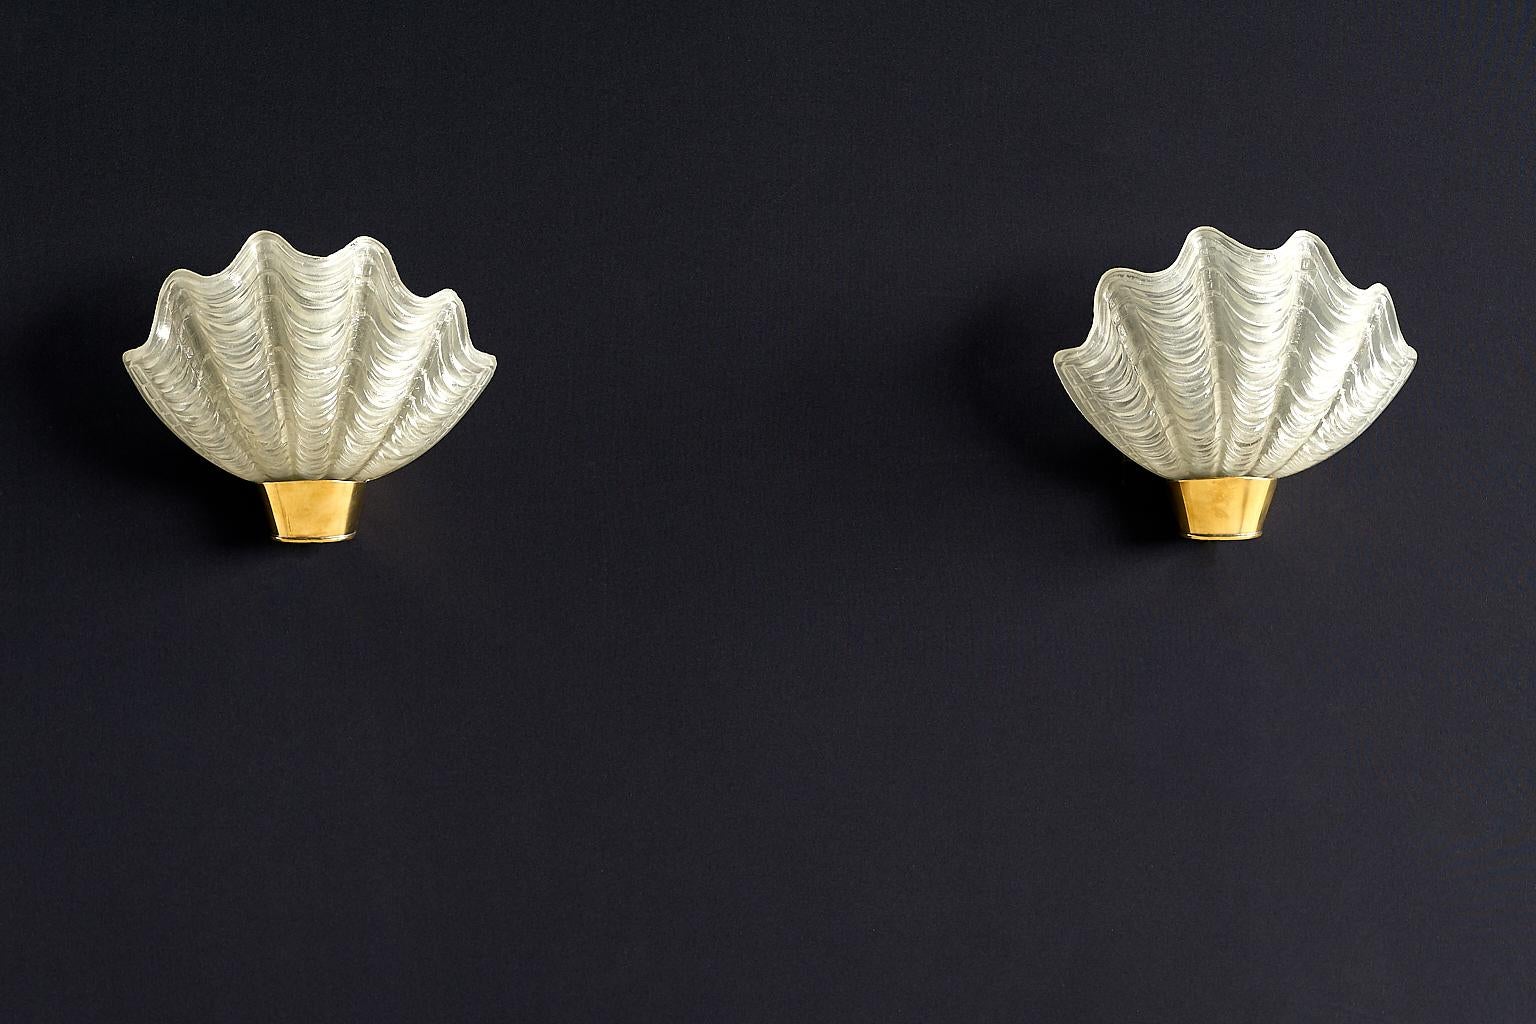 This elegant pair of wall lamps was manufactured by the Swedish company ASEA Skandia in the 1940s. The shell shaped glass shades rest on a brass fitting. The corrugated surface of the glass offers a pleasantly diffused light. Marked with ASEA